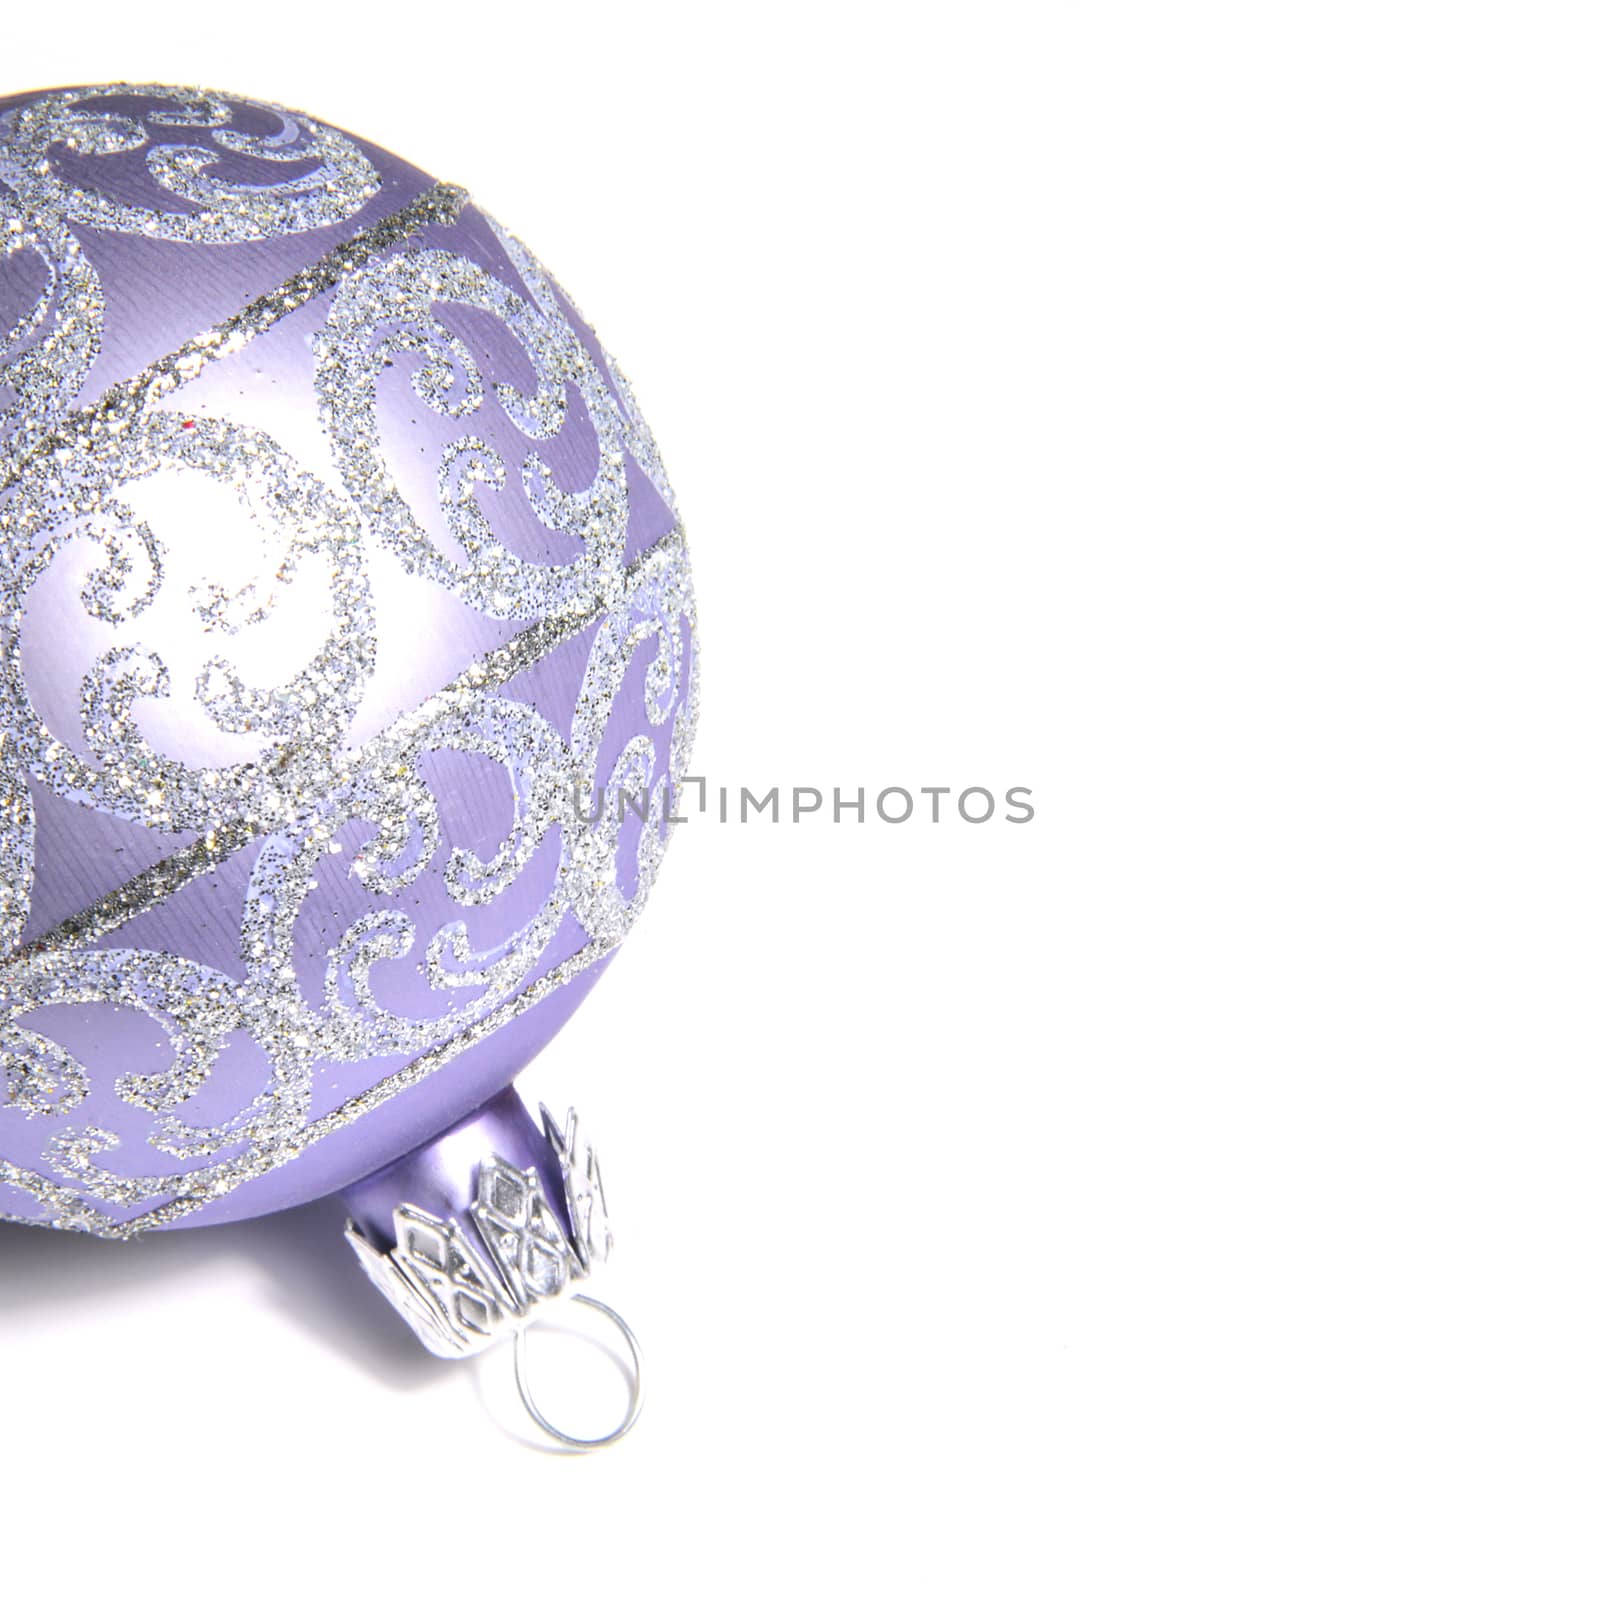 Christmas ornament isolated on white